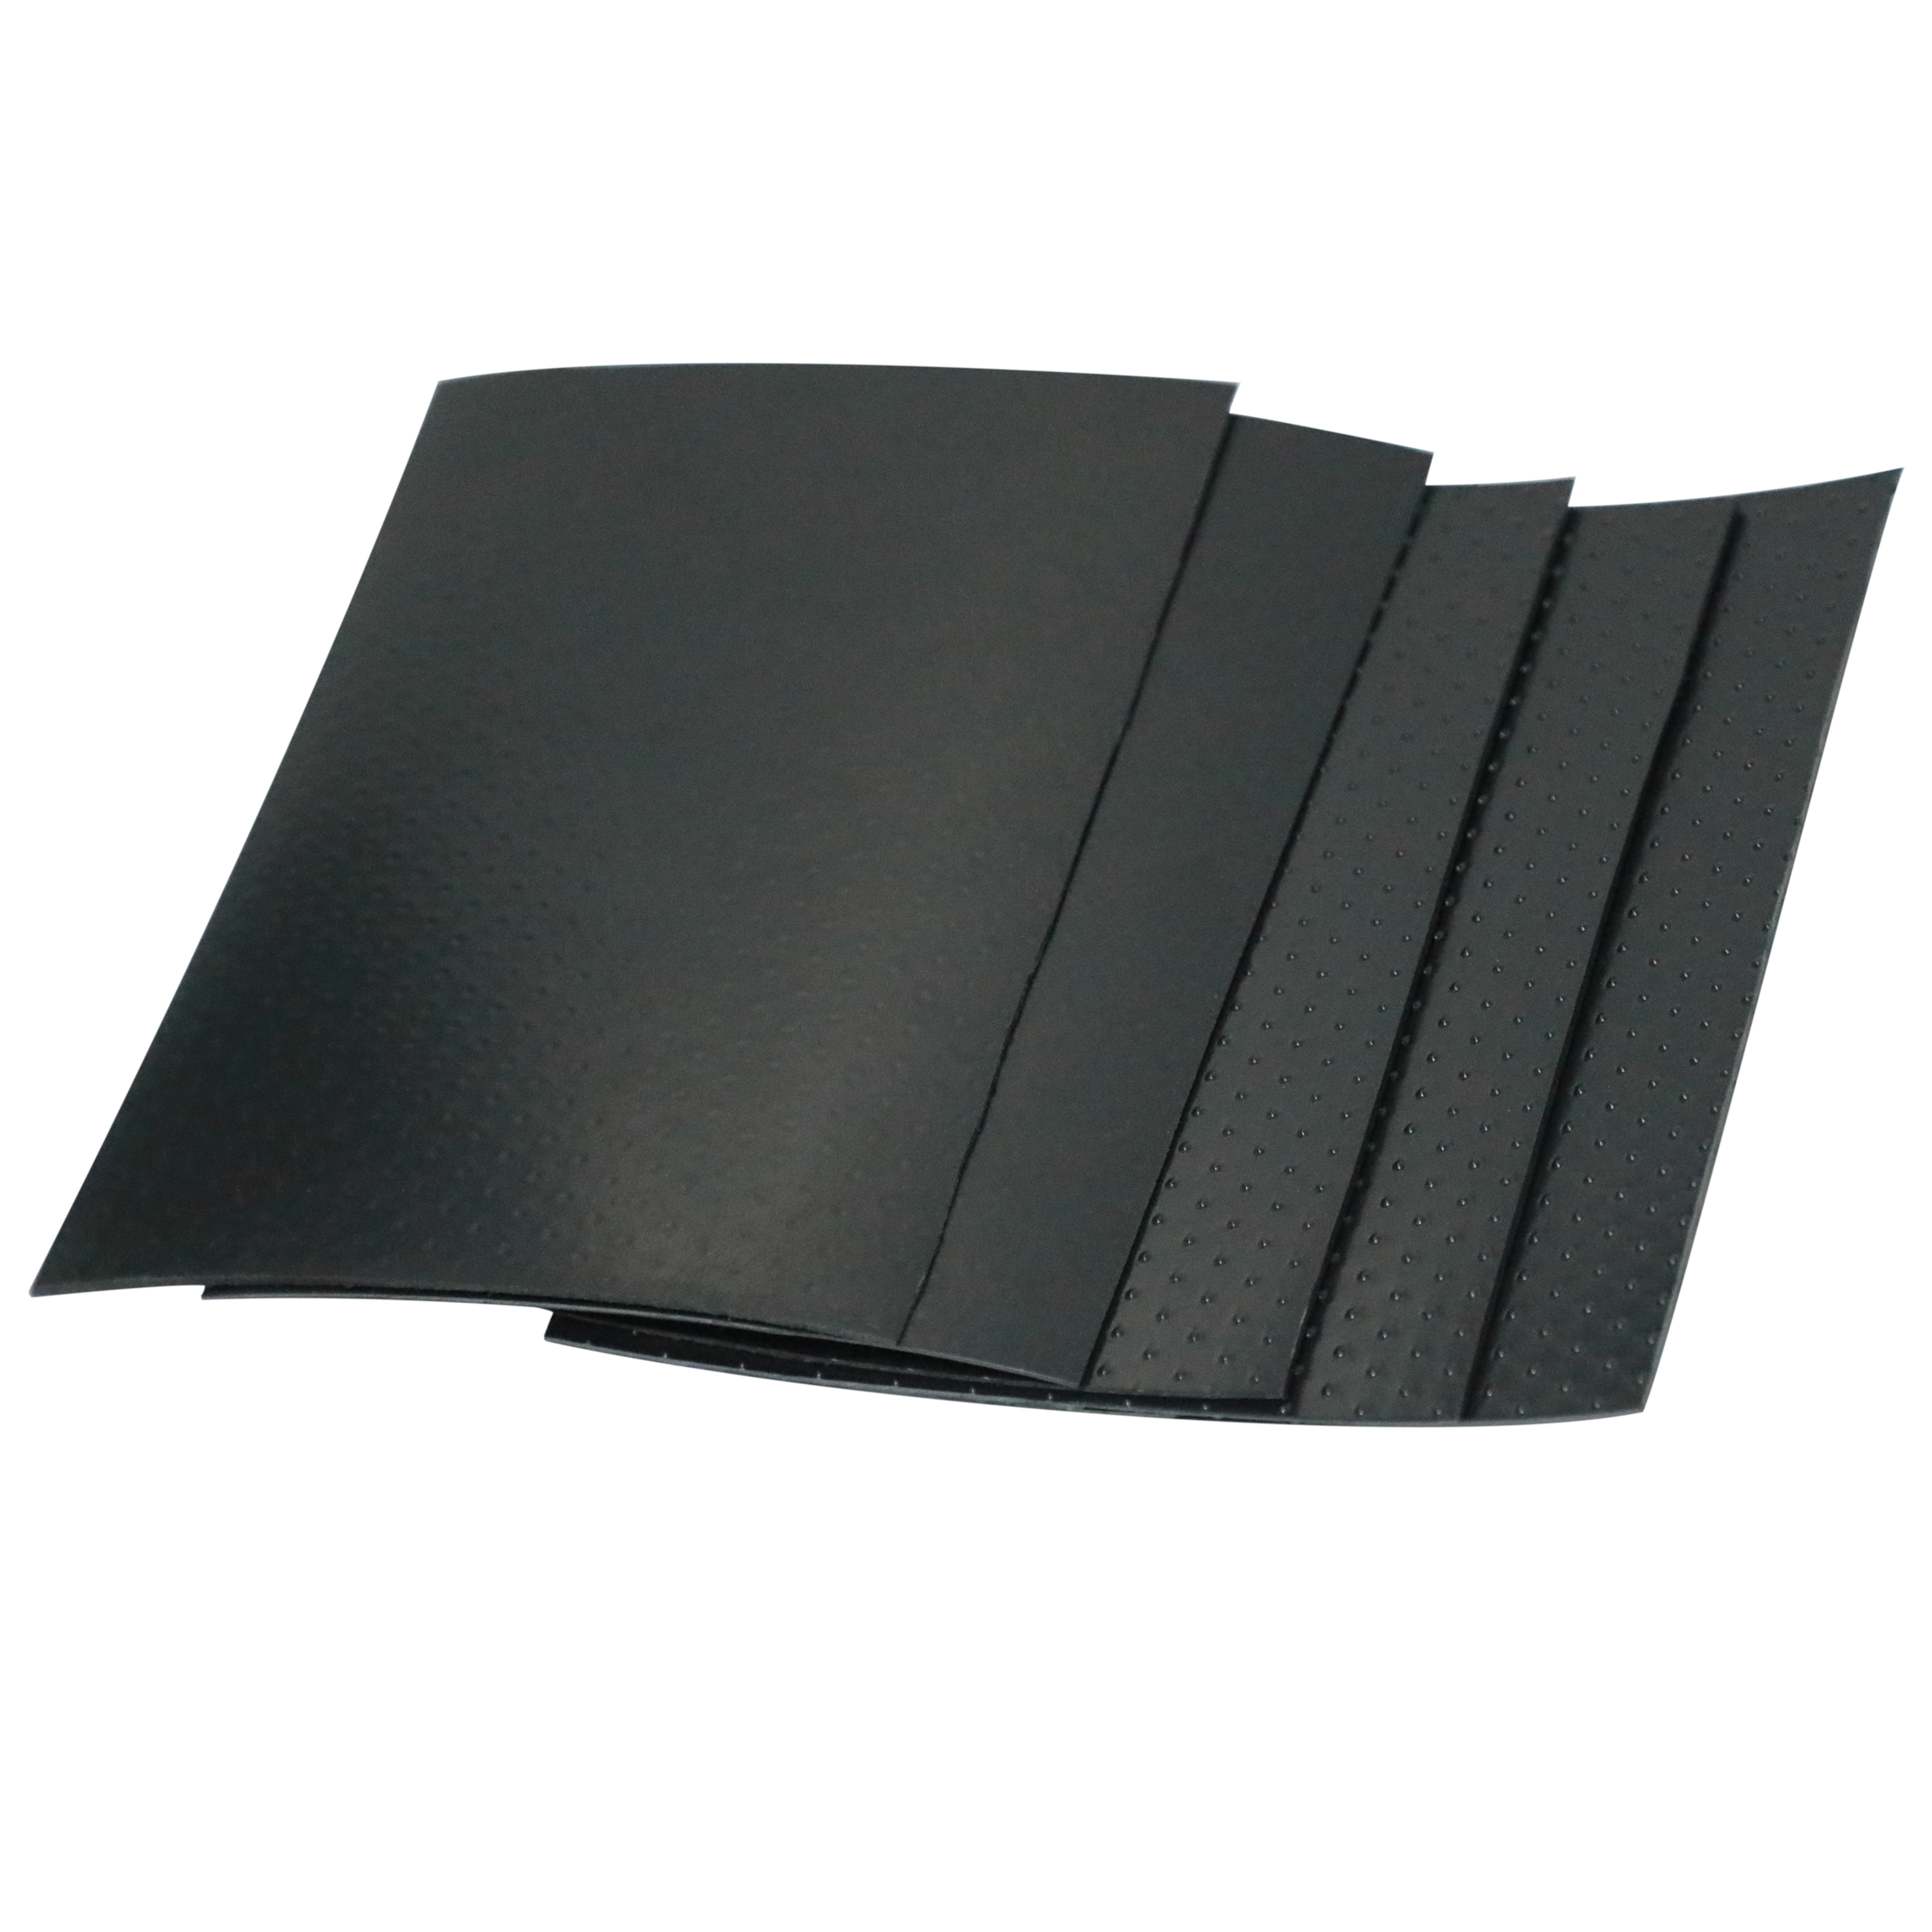 HDPE Geomembrane Liner 0.5mm 0.75mm 1.0mm 1.5mm 2.0mm